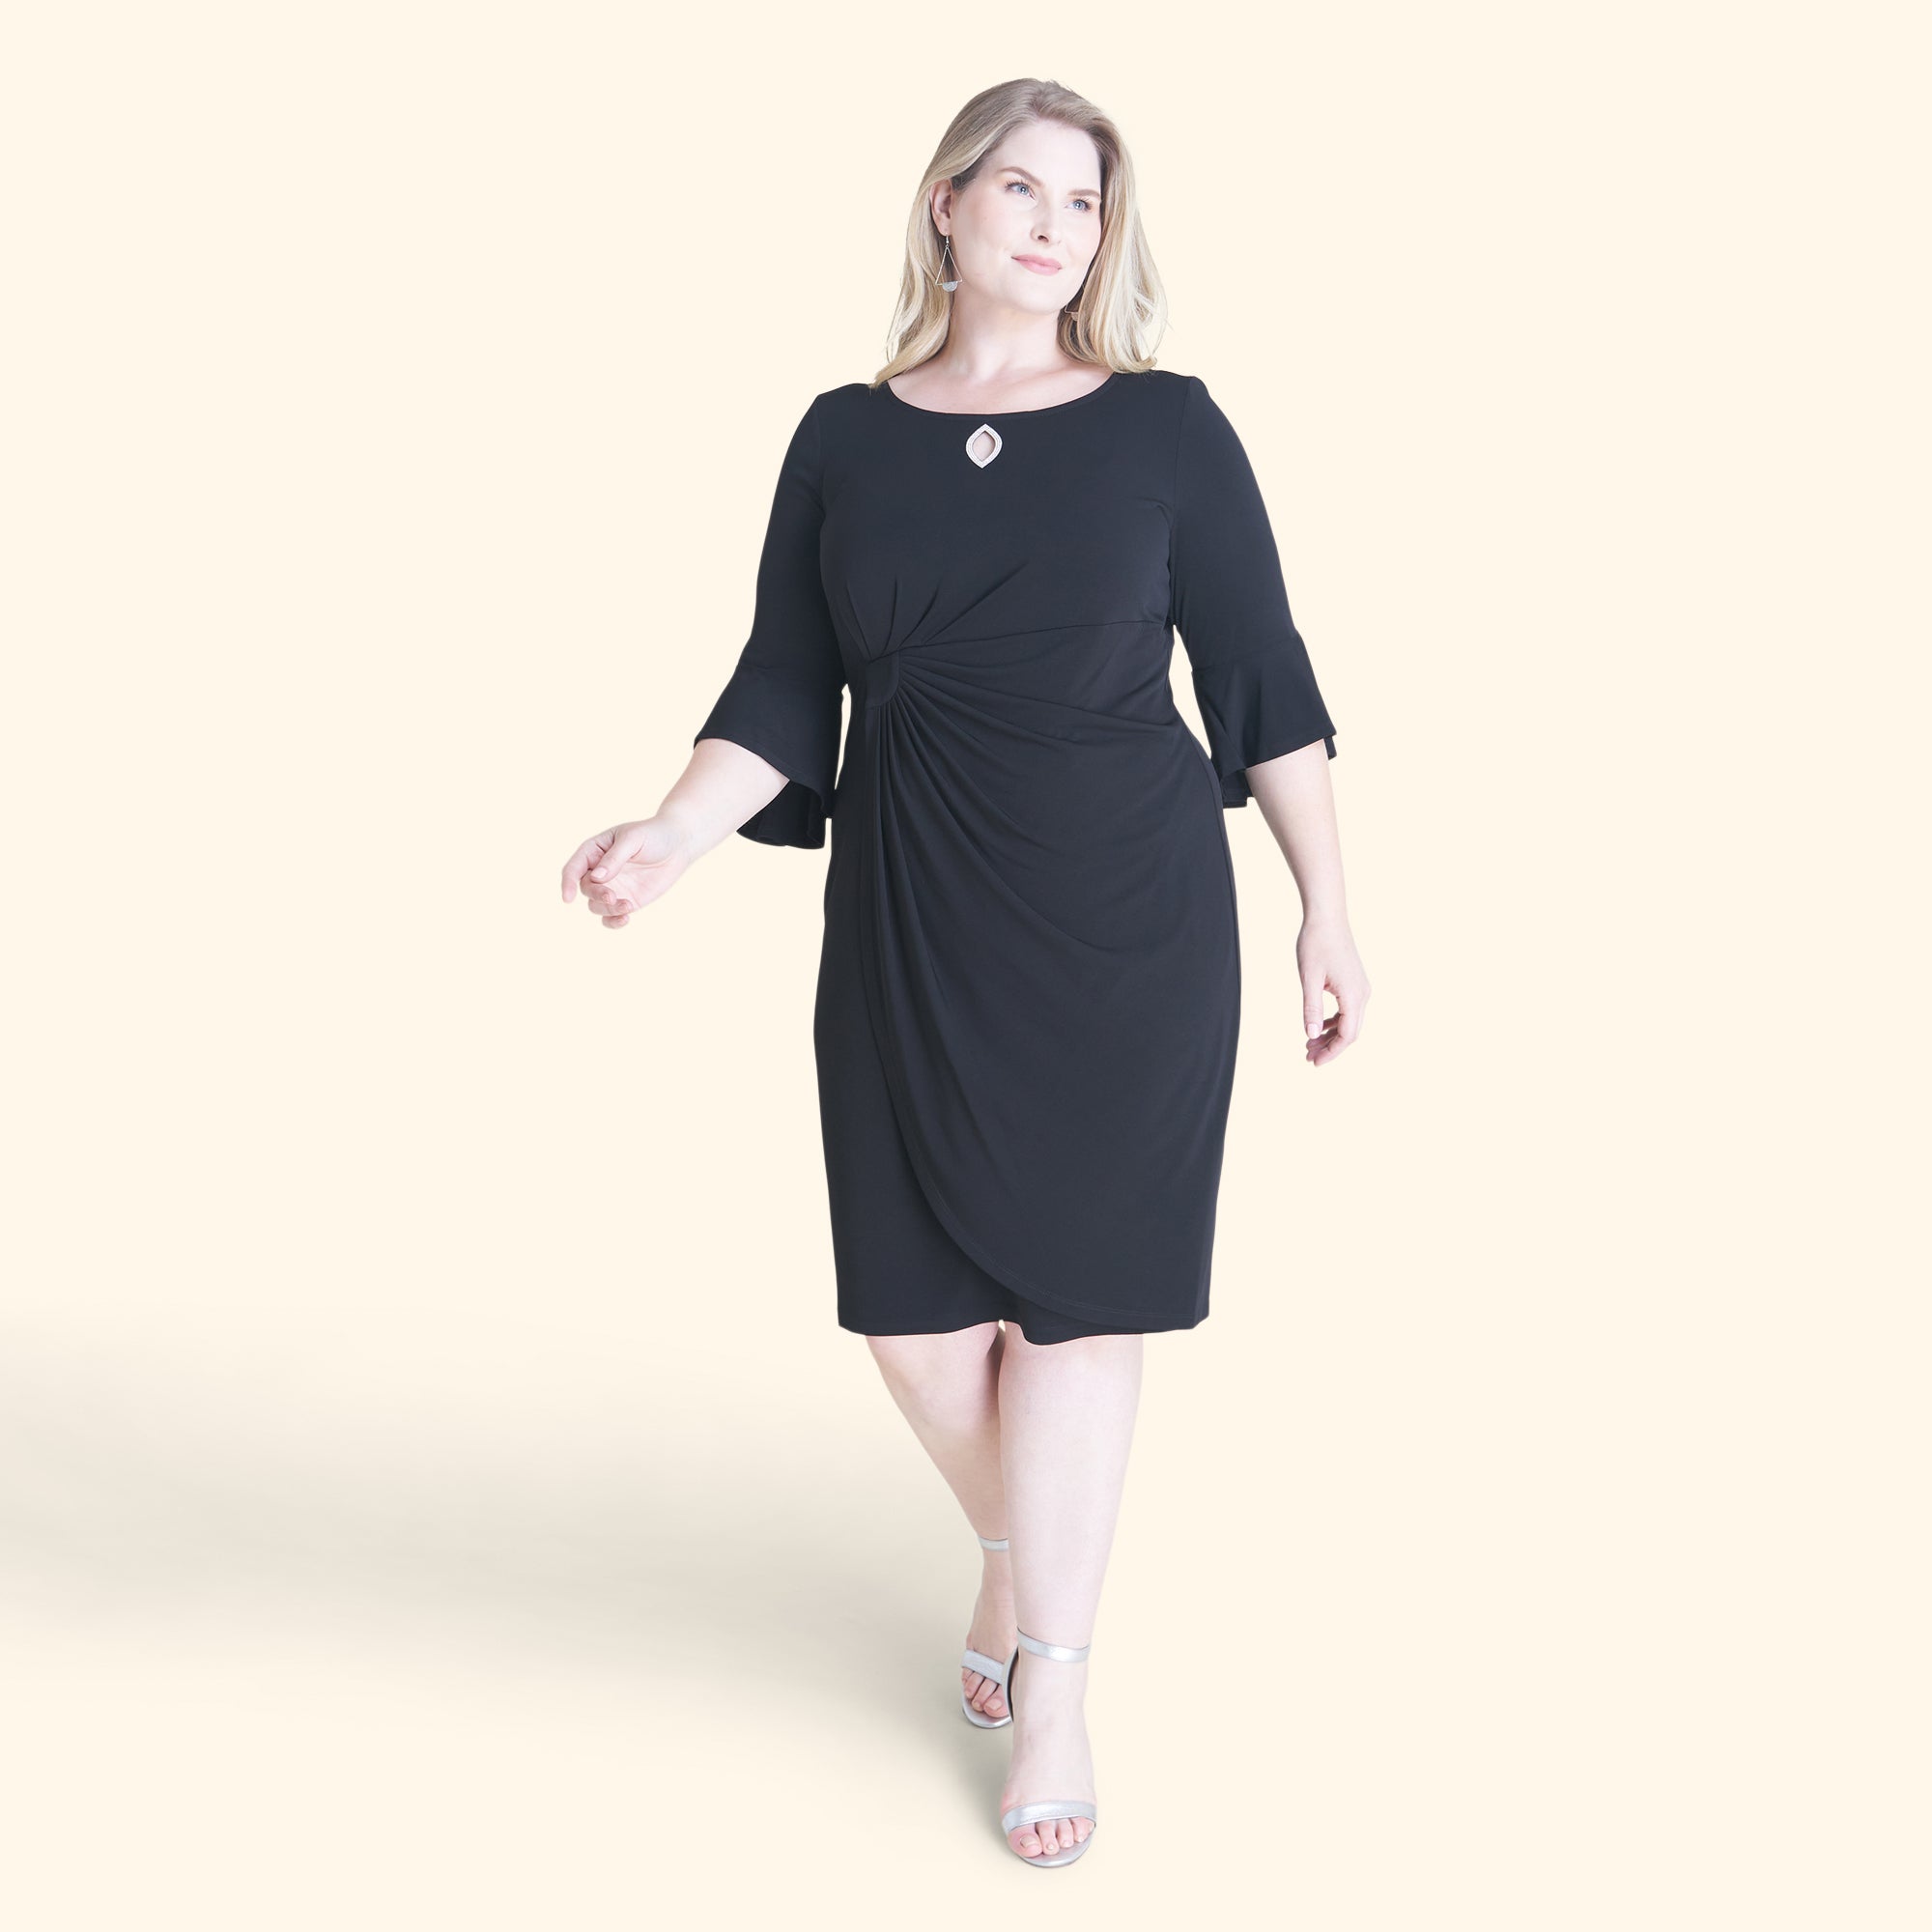 Woman posing wearing Black Lisa 2.0 Little Black Cocktail Dress from Connected Apparel